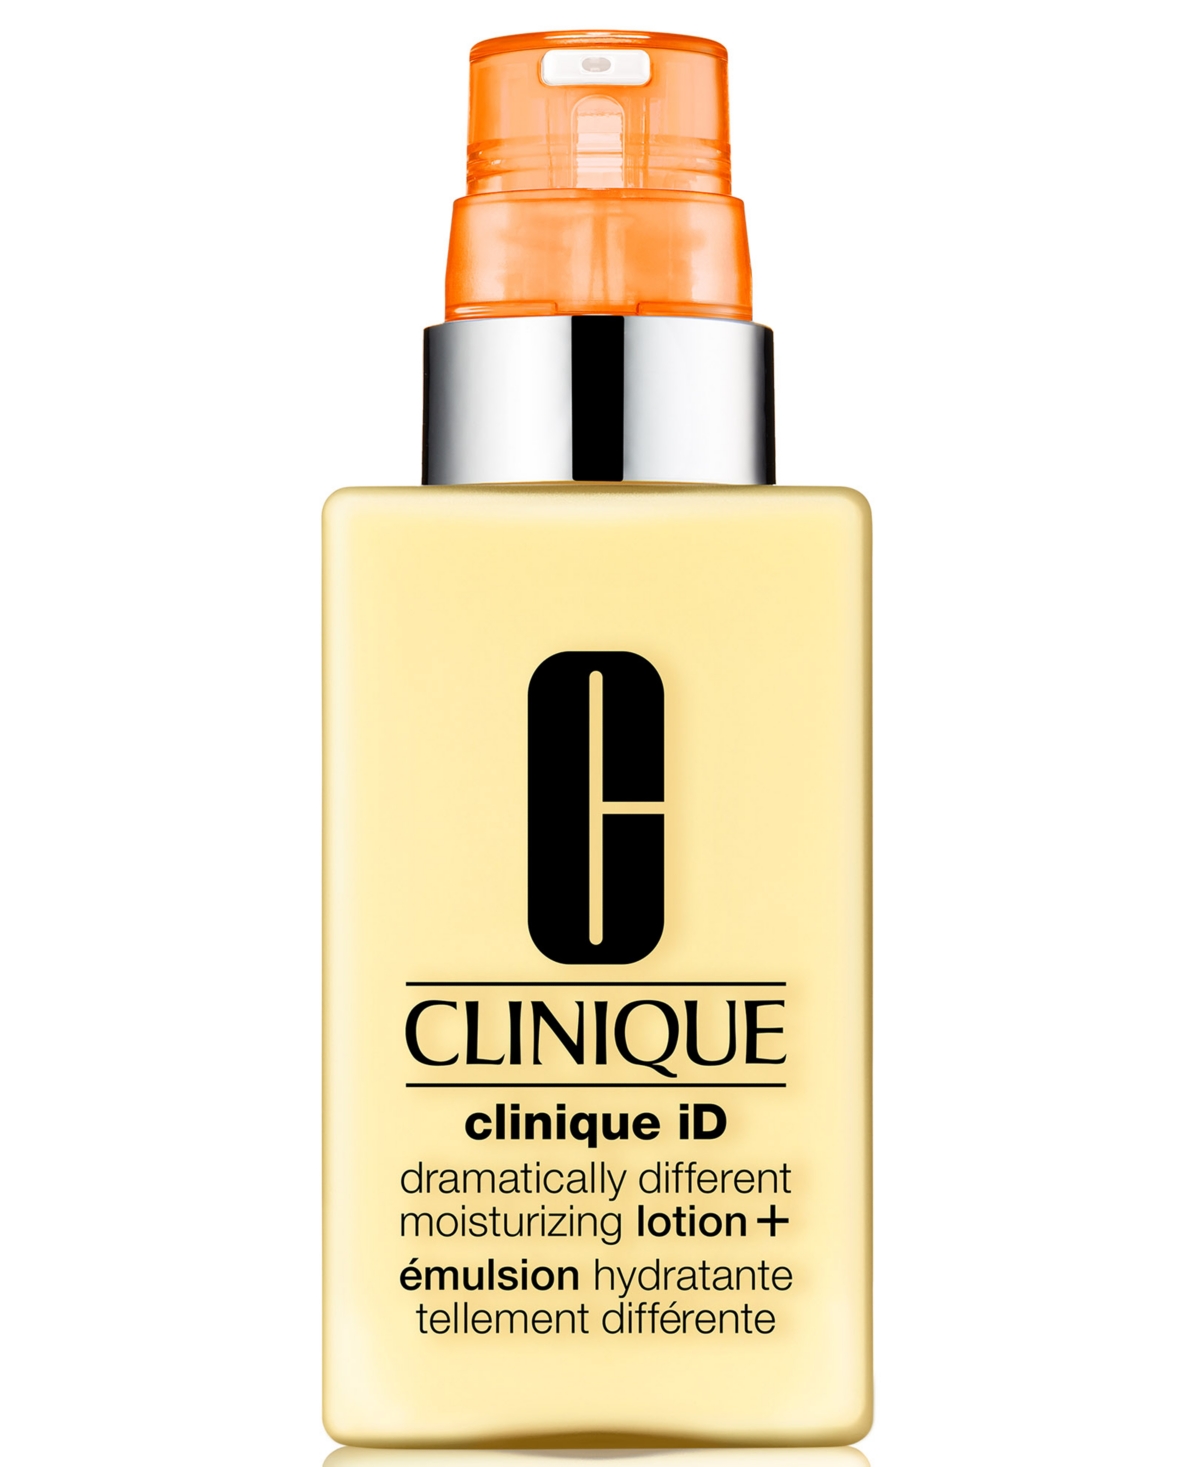 Clinique iD Dramatically Different Moisturizing Lotion+ With Active Cartridge Concentrate For Fatigue, 4.2 oz.